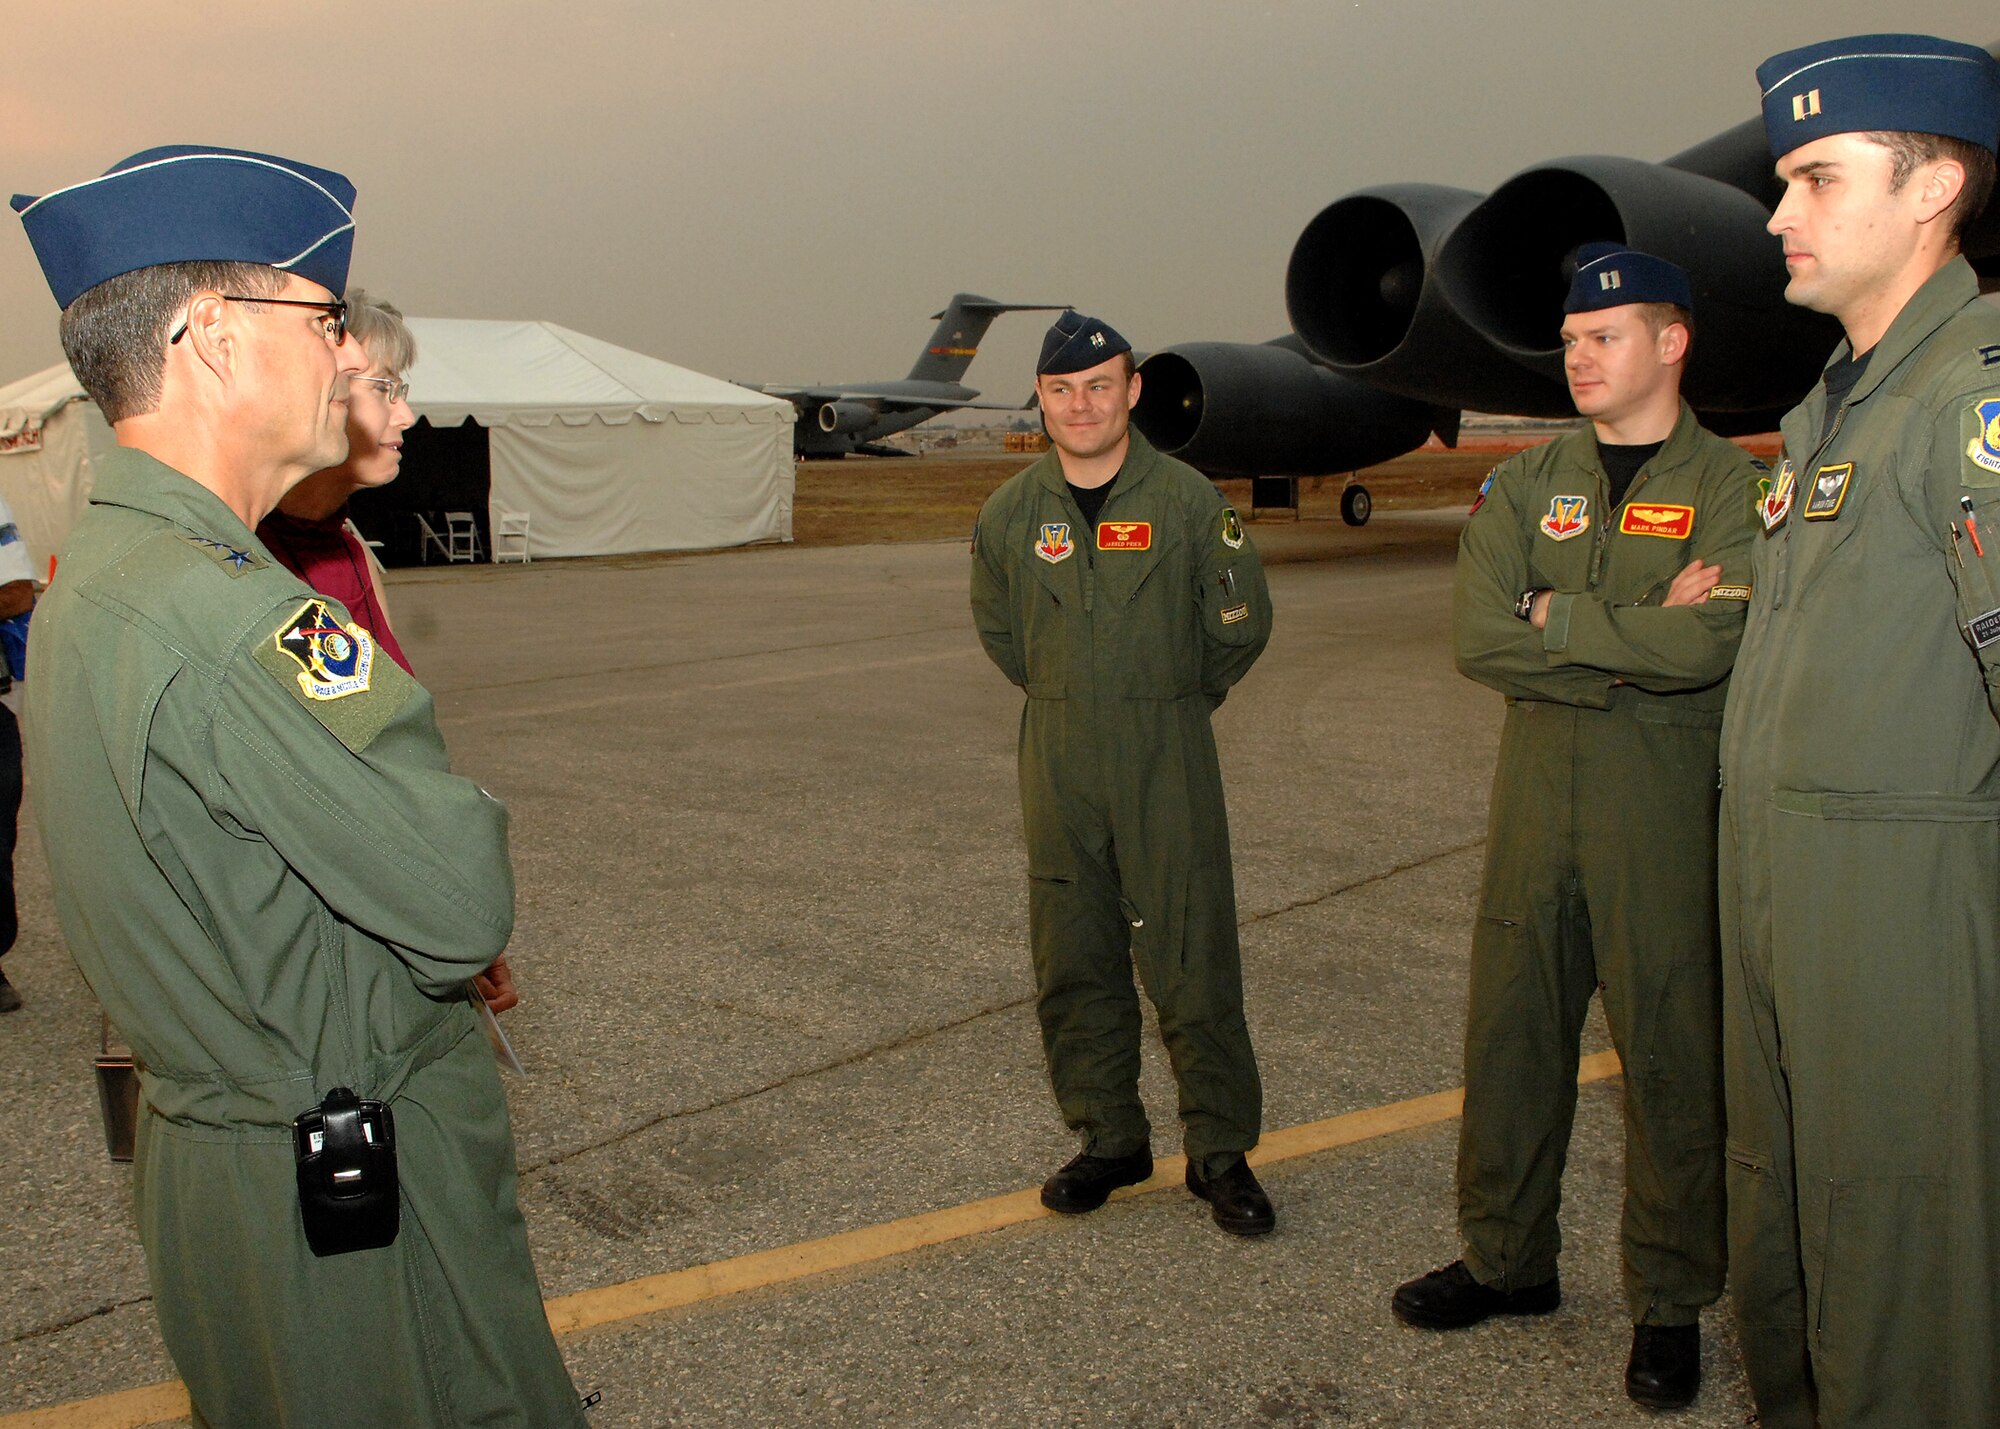 U.S. Air Force Lieutenant General John T. Sheridan, Commander, Space and Missile Systems Center, Air Force Space Command, Los Angels Air Force Base, California, Talks to the crew of a B52H Bomber from Minot Air Force Base, North Dakota, during Wings Over Long Beach at the Long Beach Airport, November 15, 2008.  (U.S. Air Force photo by Senior Airman Matthew Smith)